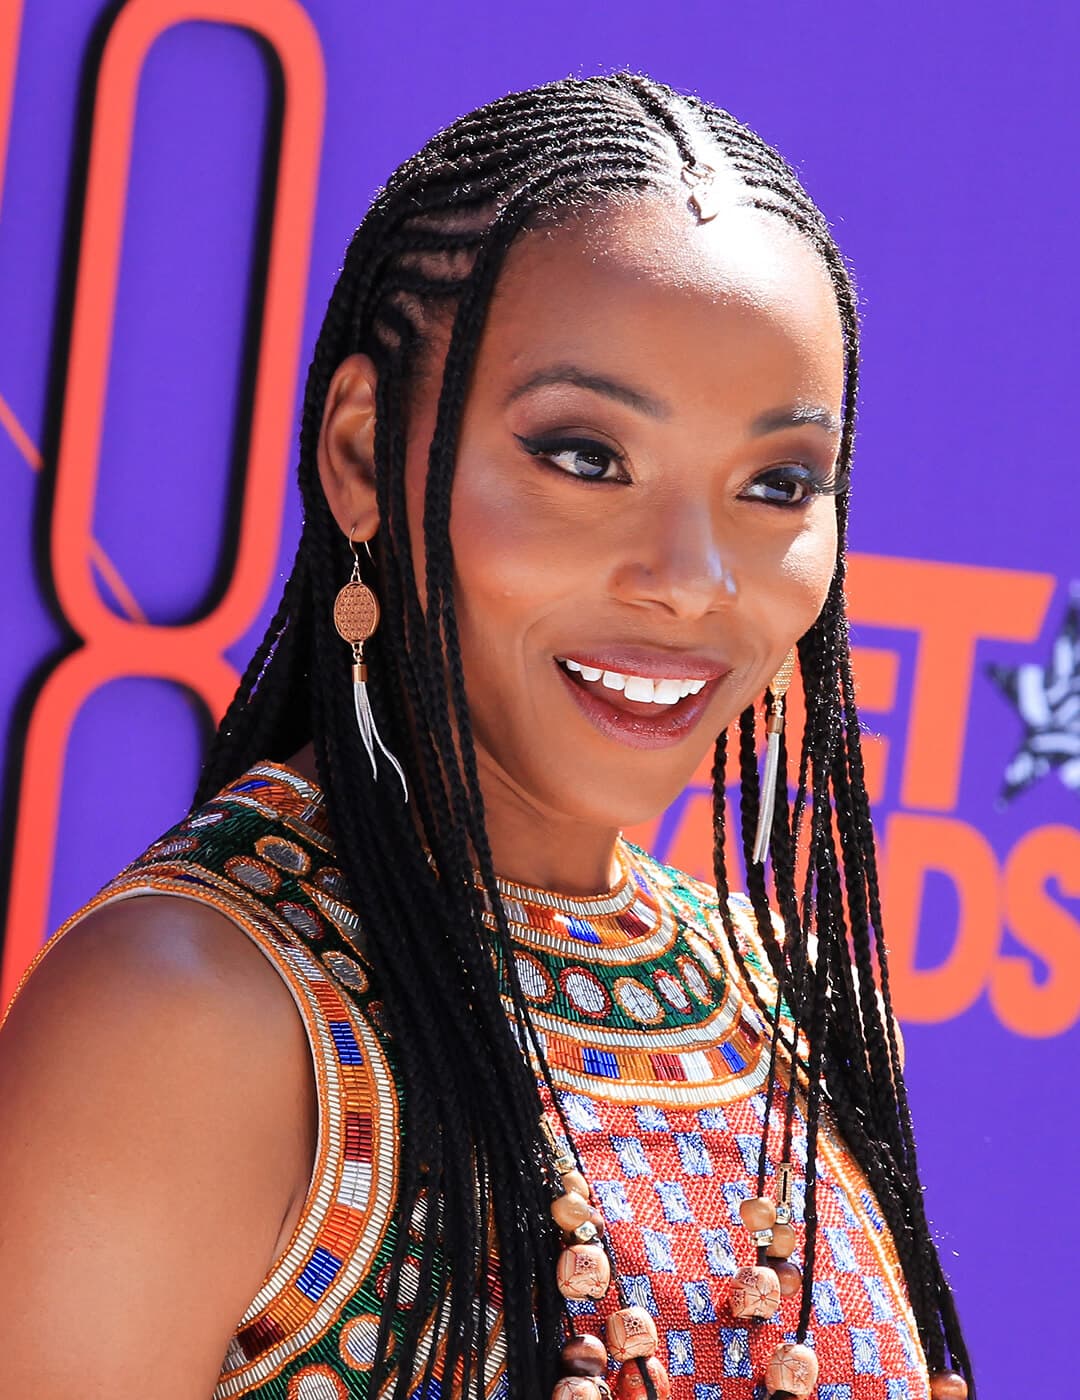 Erica Ash rocking a long, braided hairstyle